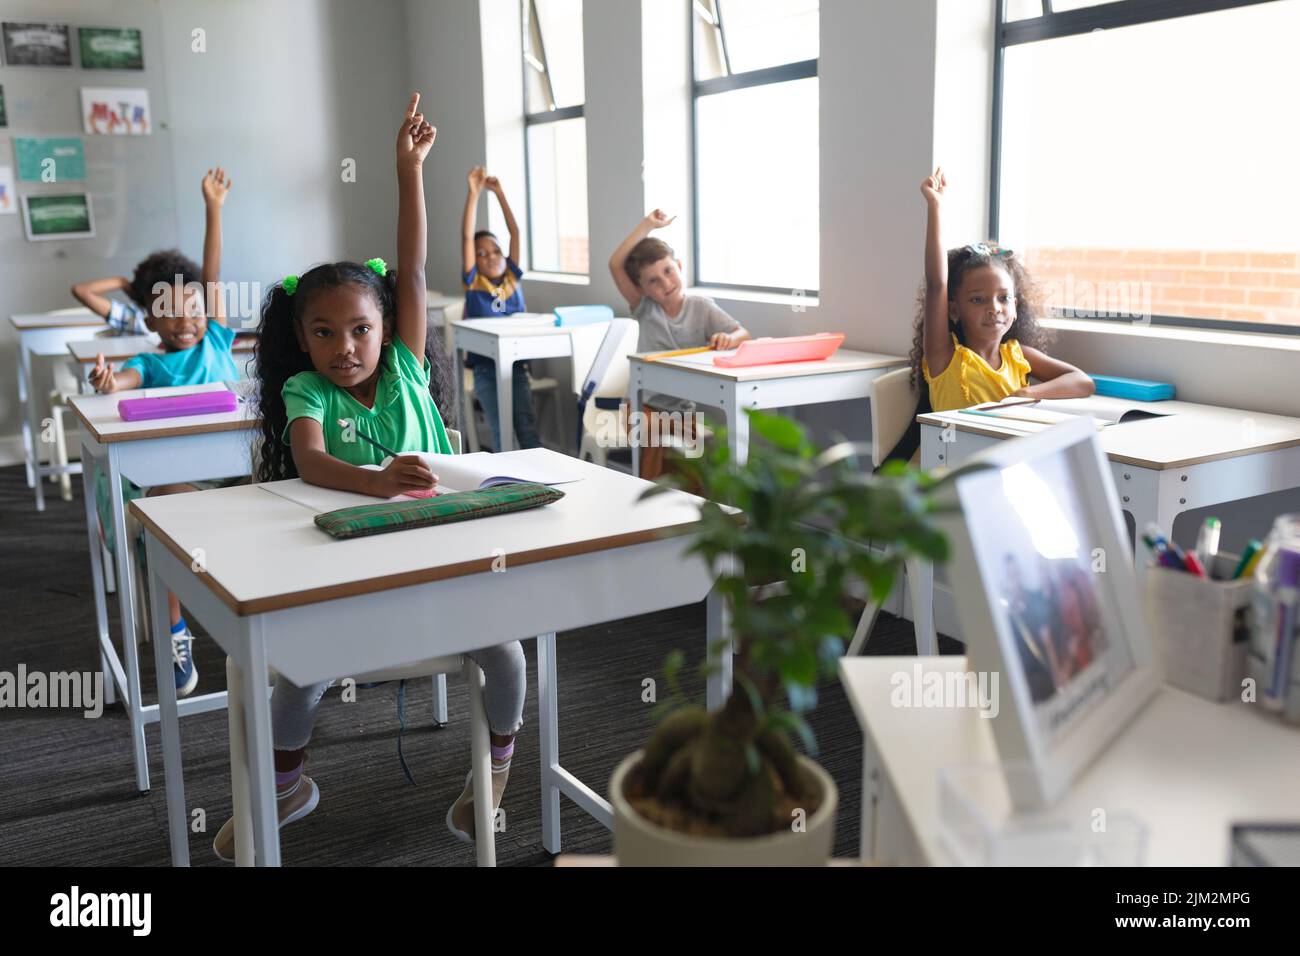 Multiracial elementary school students with hands raised sitting at desk in classroom. unaltered, education, childhood, learning and school concept. Stock Photo